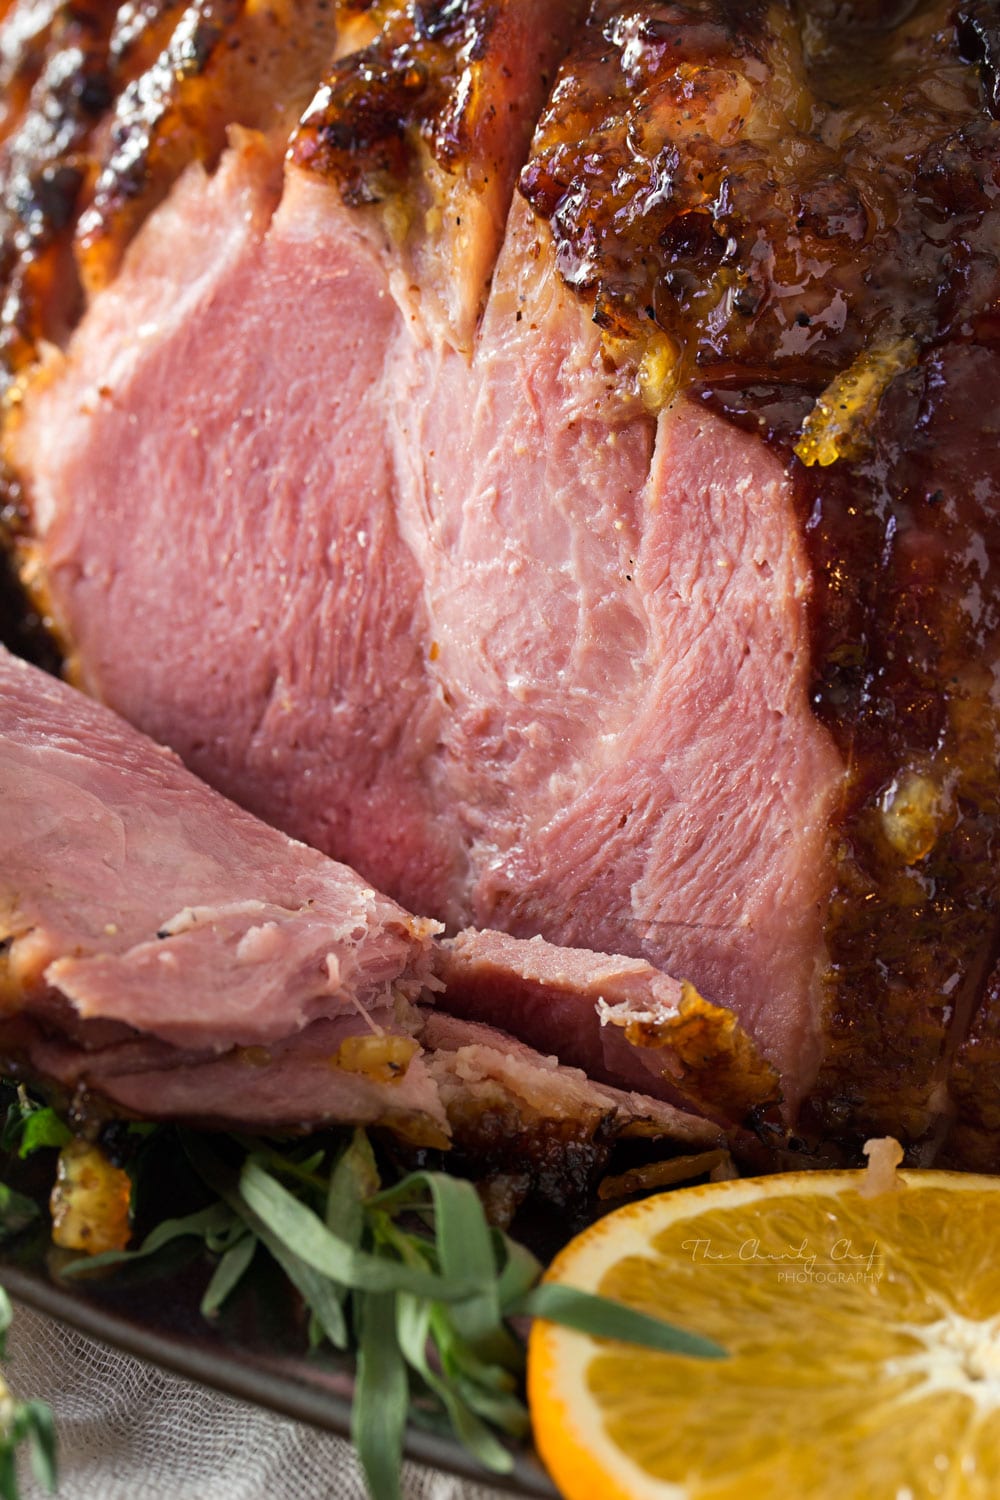 Bourbon Mustard Orange Glazed Ham | Sticky, sweet, tangy, and full of flavor... this bourbon mustard and orange glazed ham is one that you'll be happy to have as the star of your holiday meal! | http://thechunkychef.com